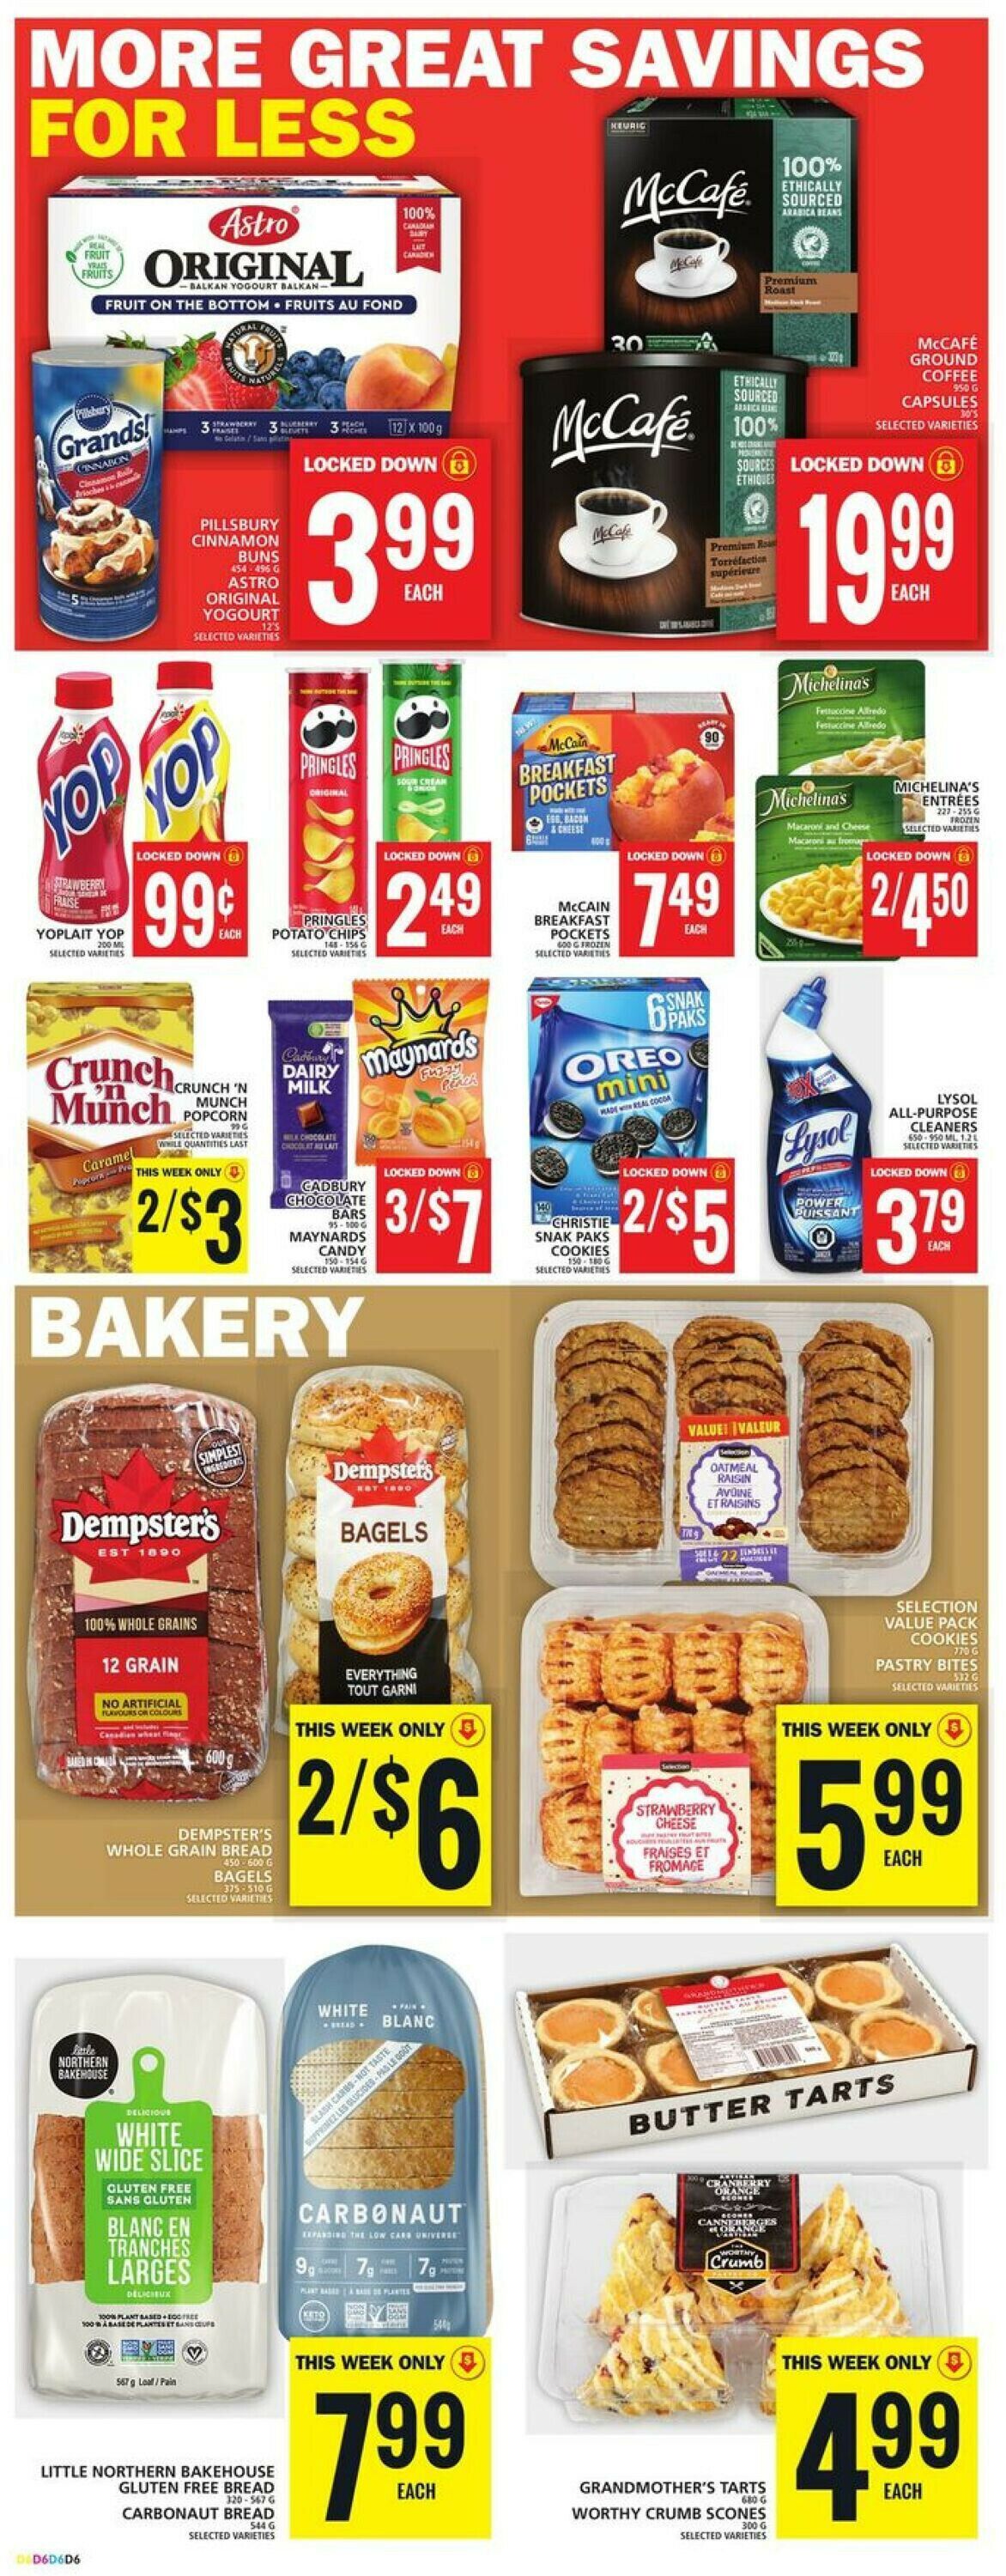 Food Basics Flyer from 01/04/2024